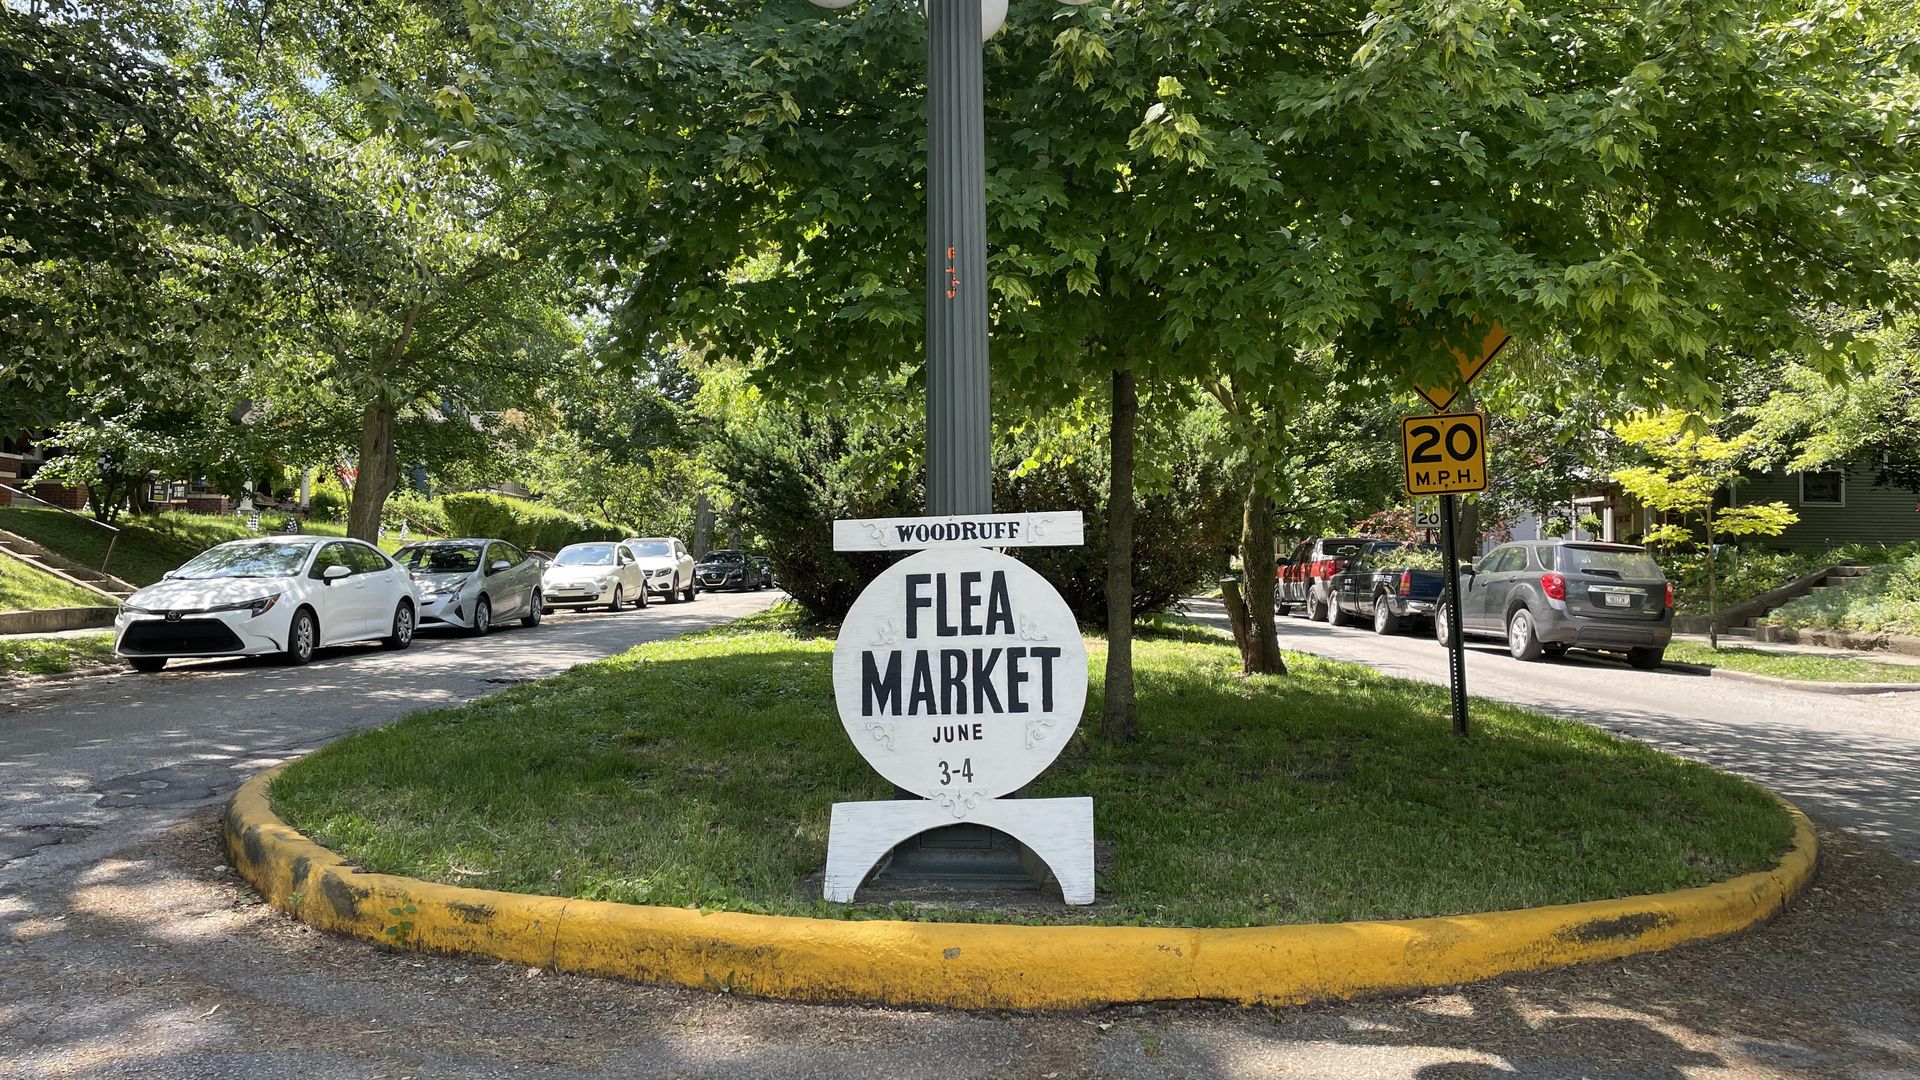 Sign that says "flea market" leaning against a lamp post on an esplanade